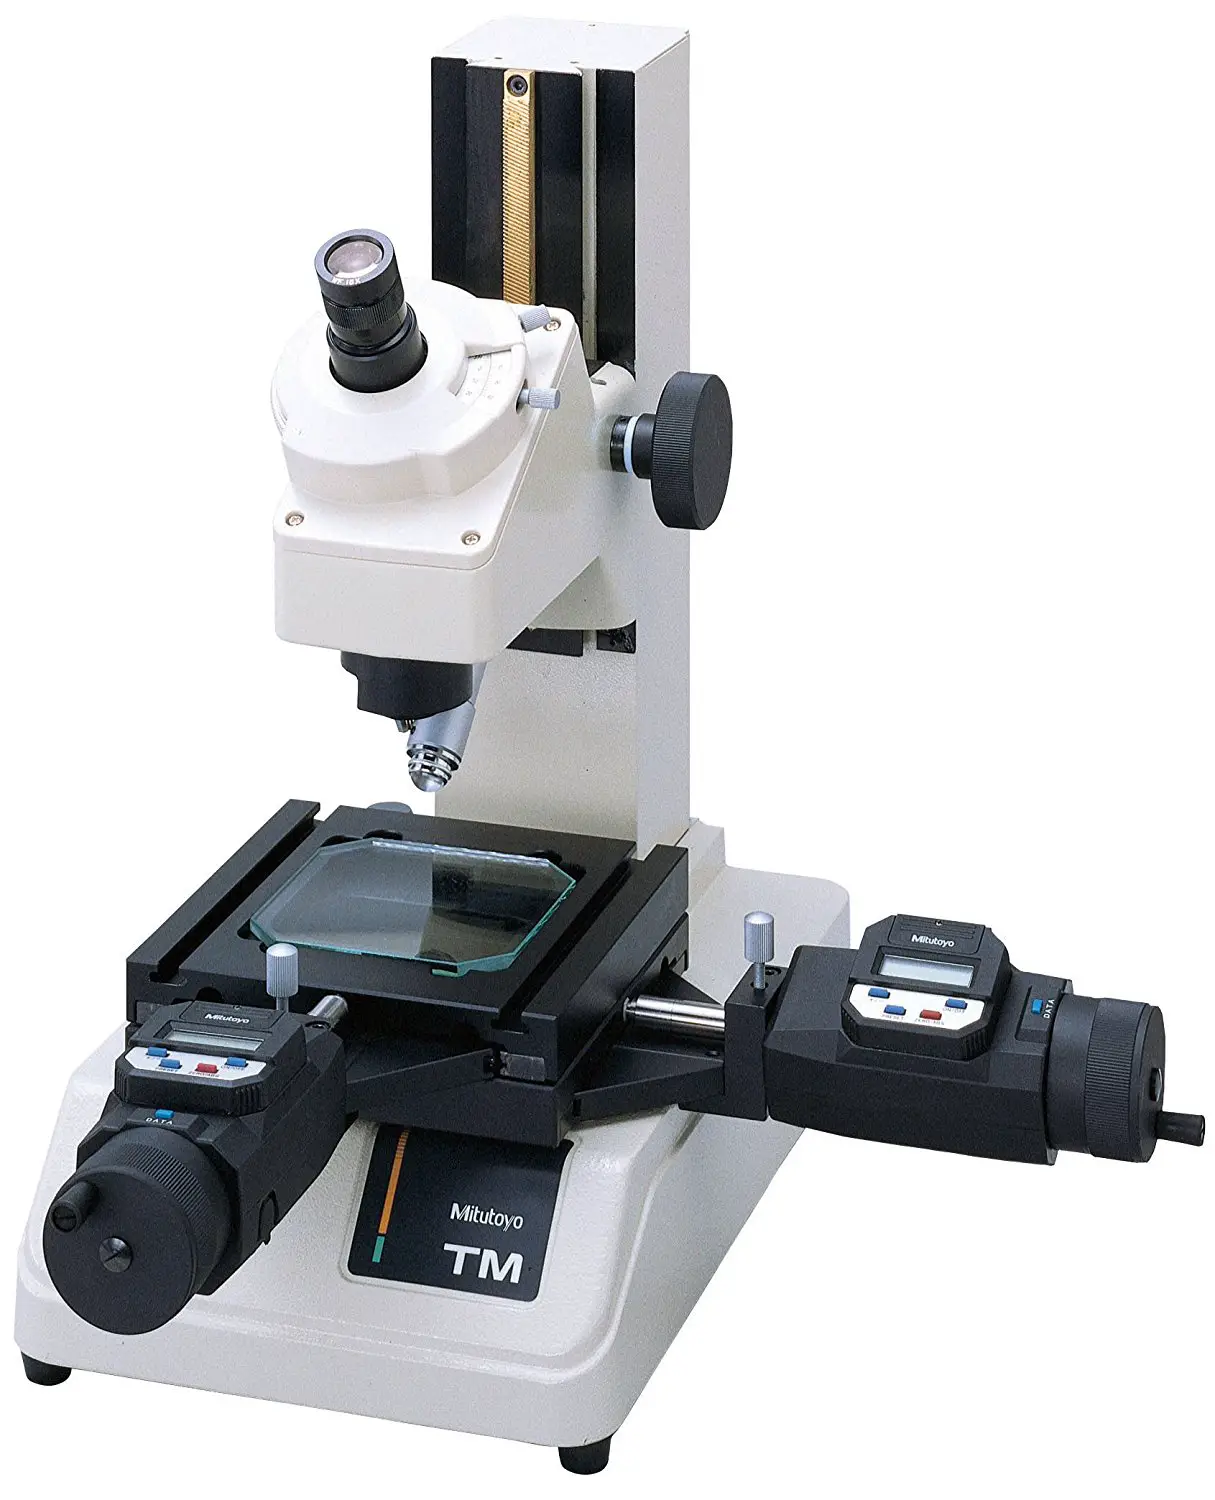 toolmakers microscope buyers guide - function, application and benefits